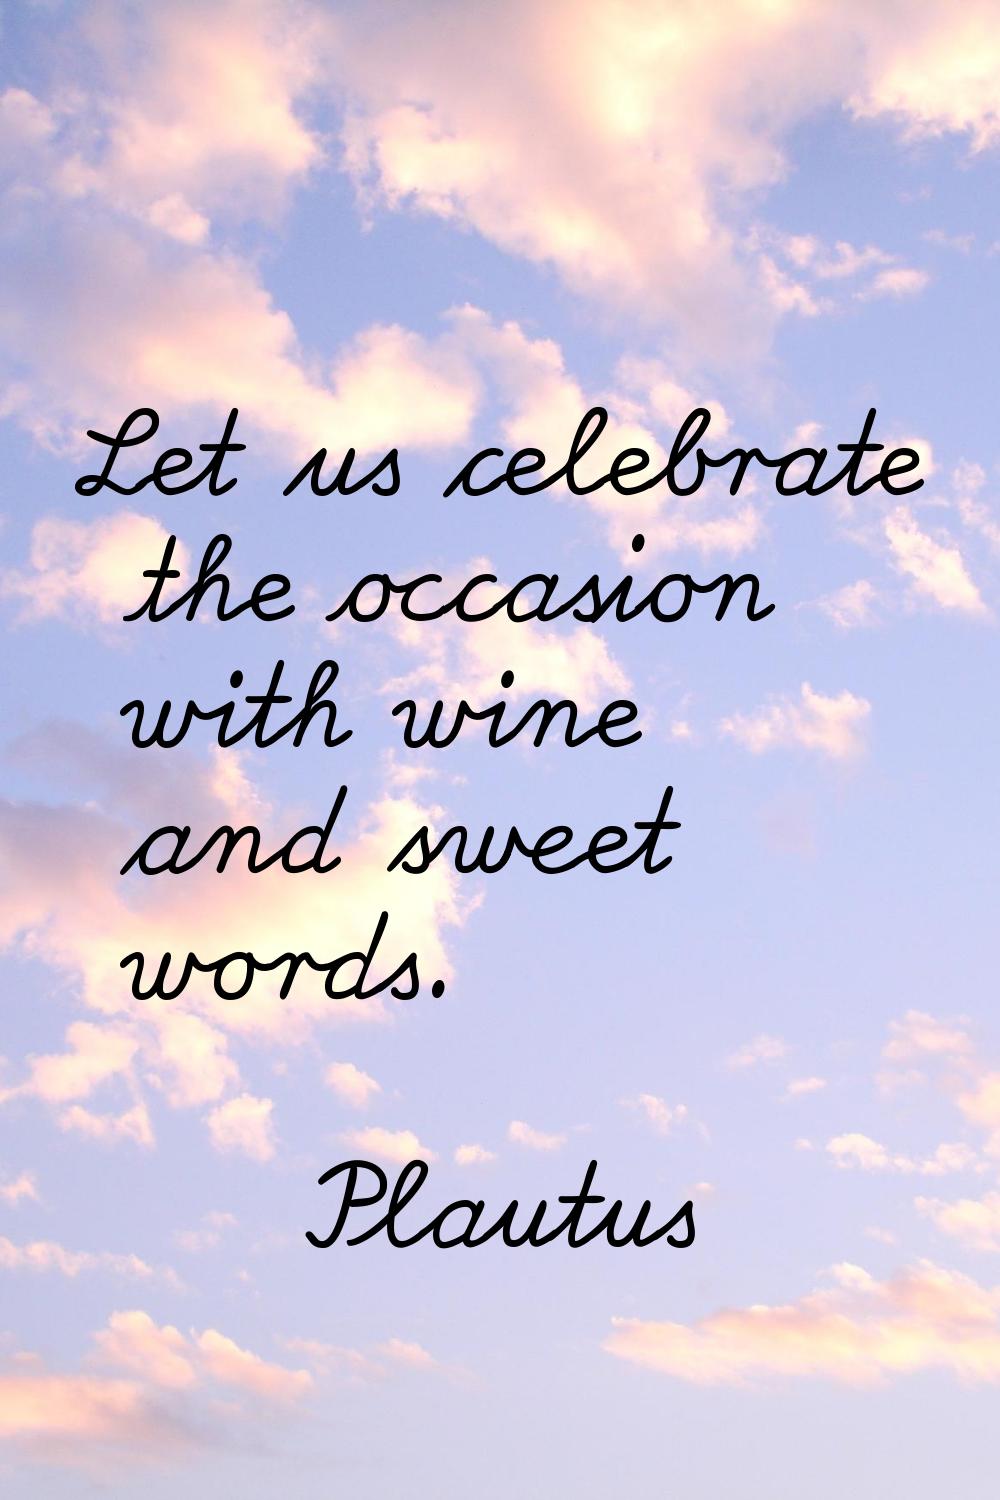 Let us celebrate the occasion with wine and sweet words.